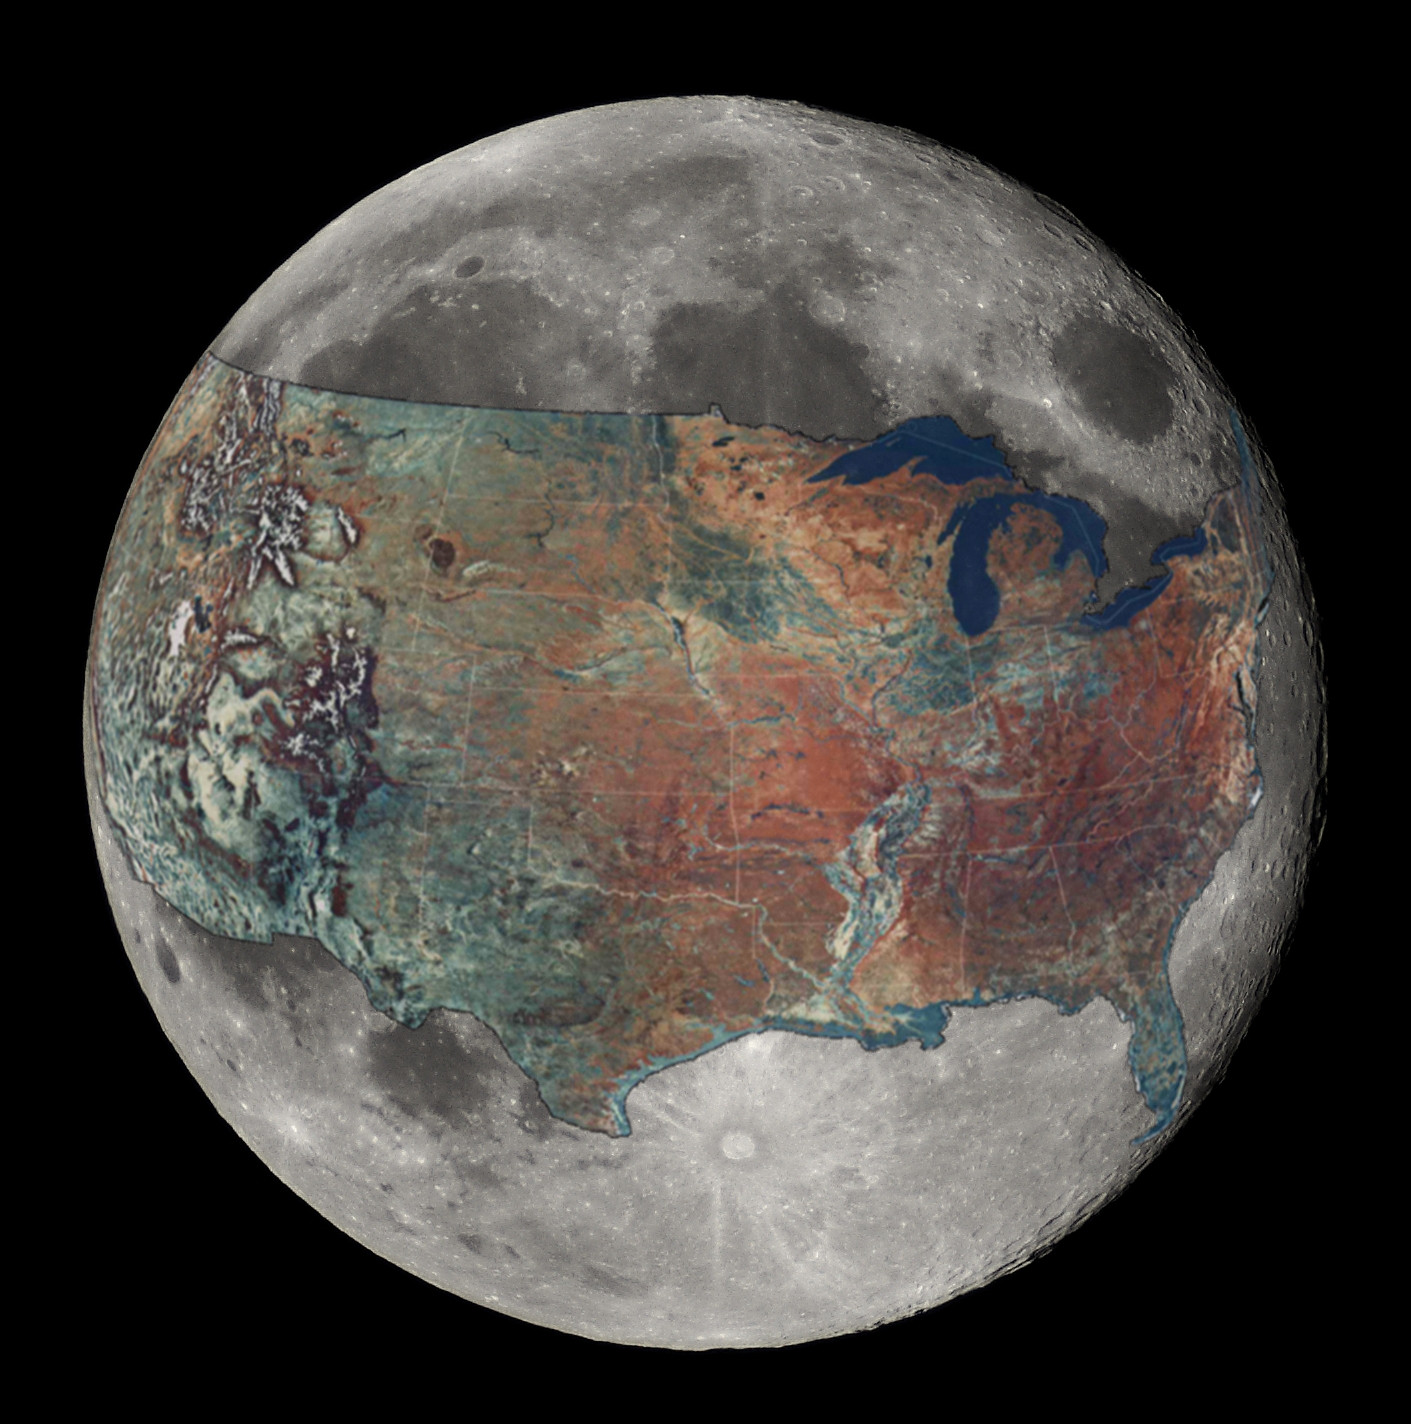 U.S. overlaid on the Moon for a sense of scale FlowingData